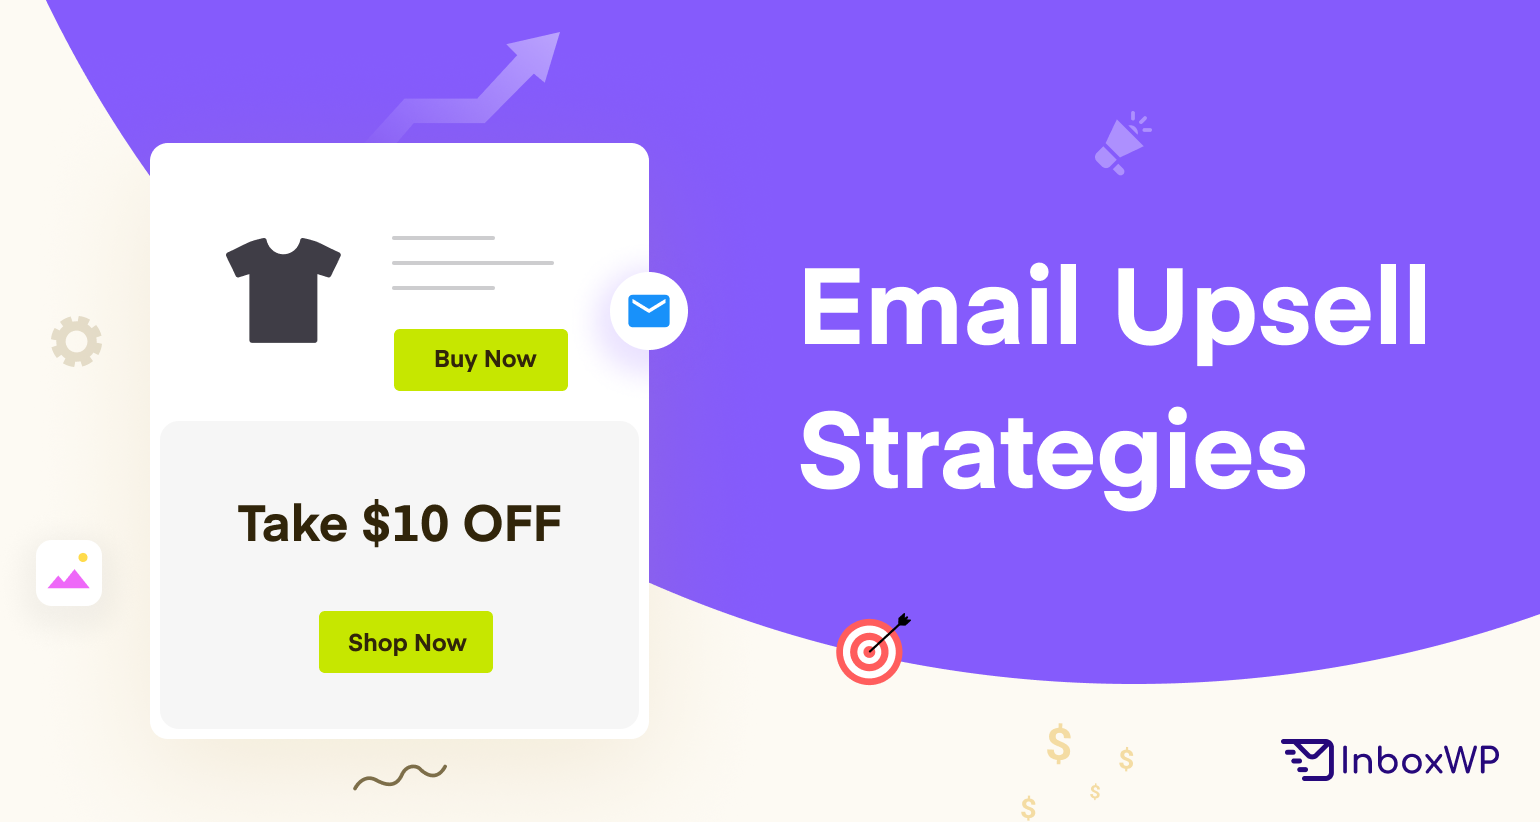 Email Upsell Strategies